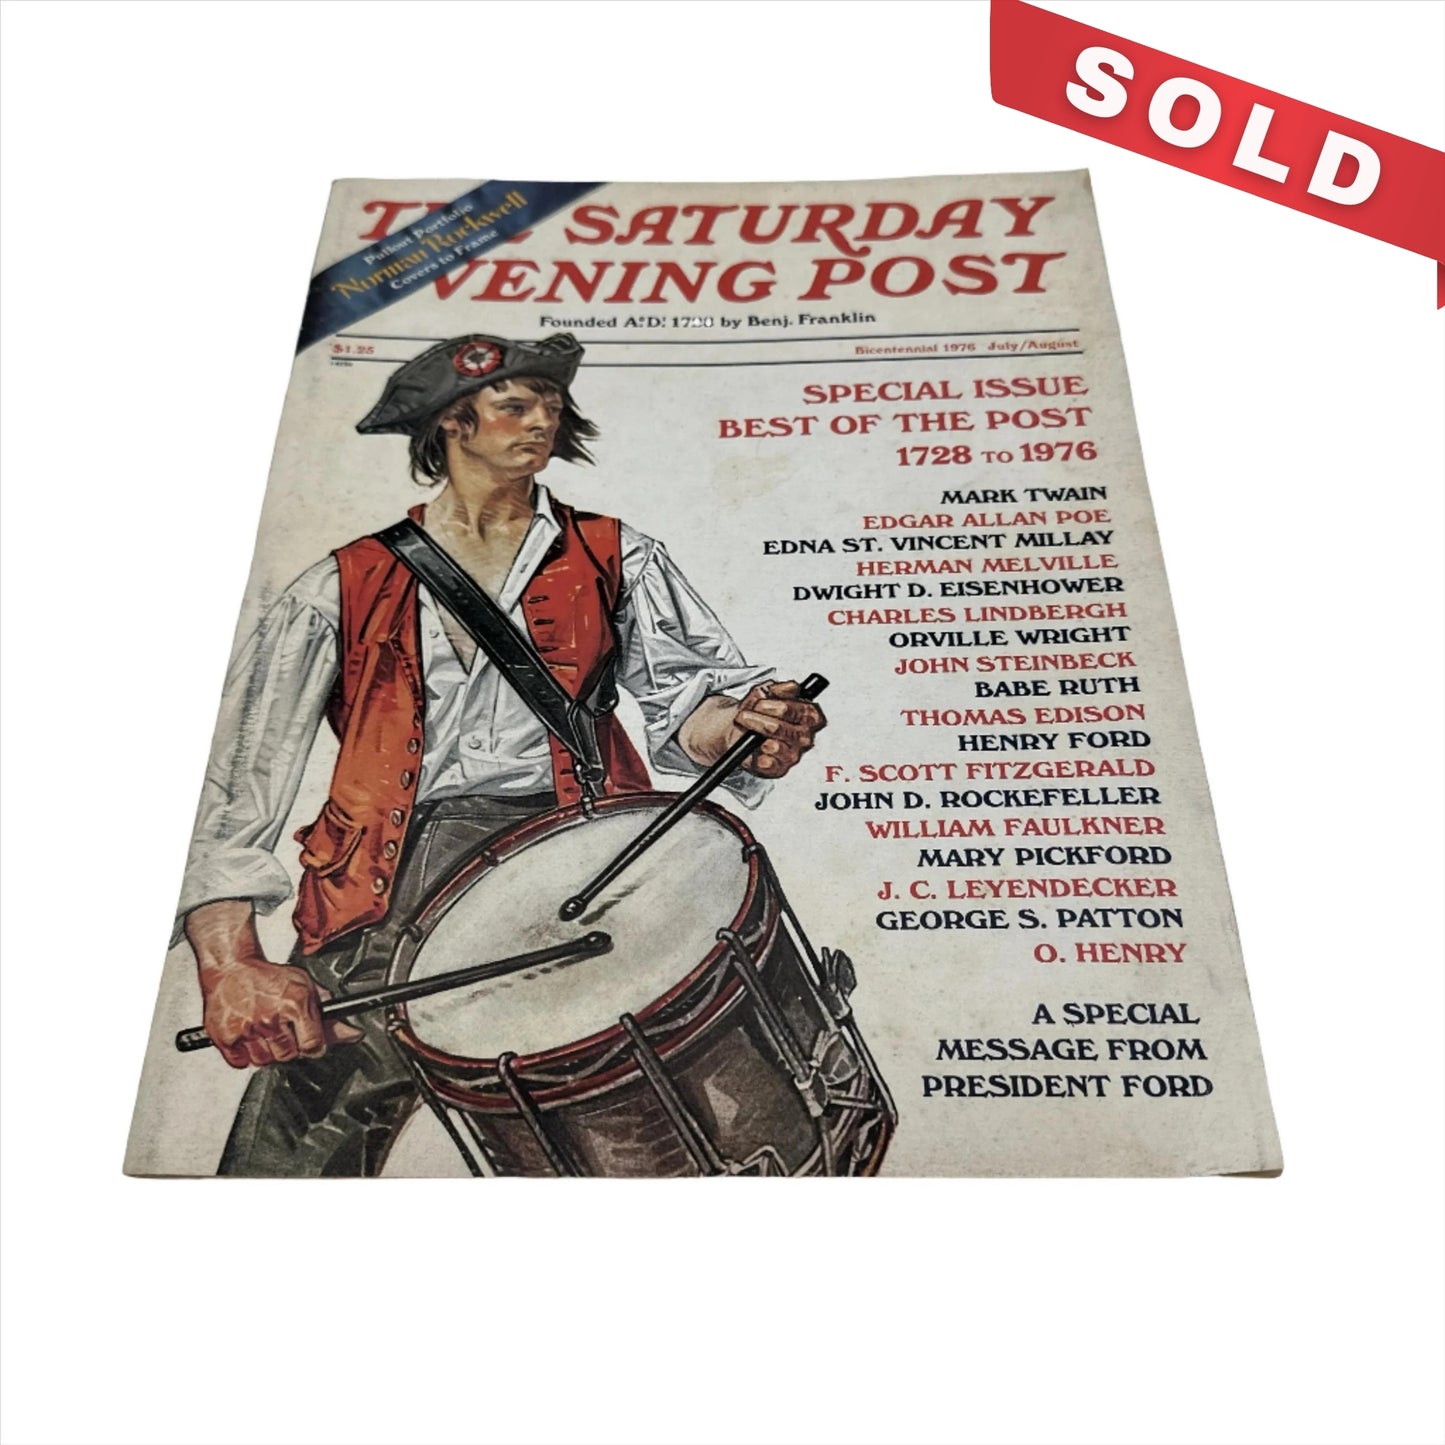 The Saturday Evening Post — Bicentennial edition - With historic articles and Rockwell's famous Four Freedoms